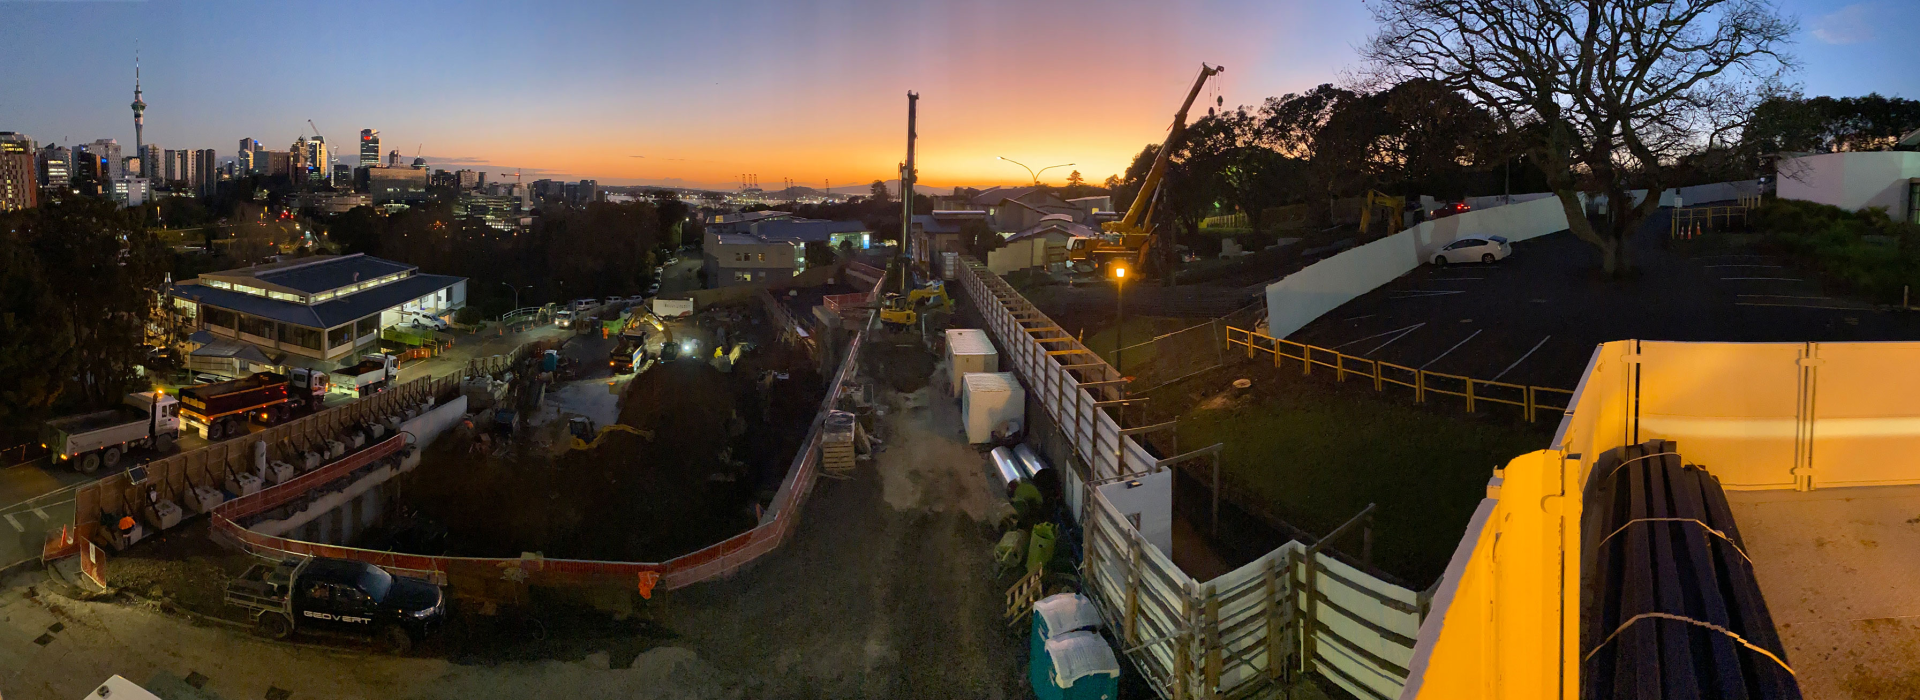 Completion of enabling works on Auckland City Hospital Central Plant and Tunnel Project